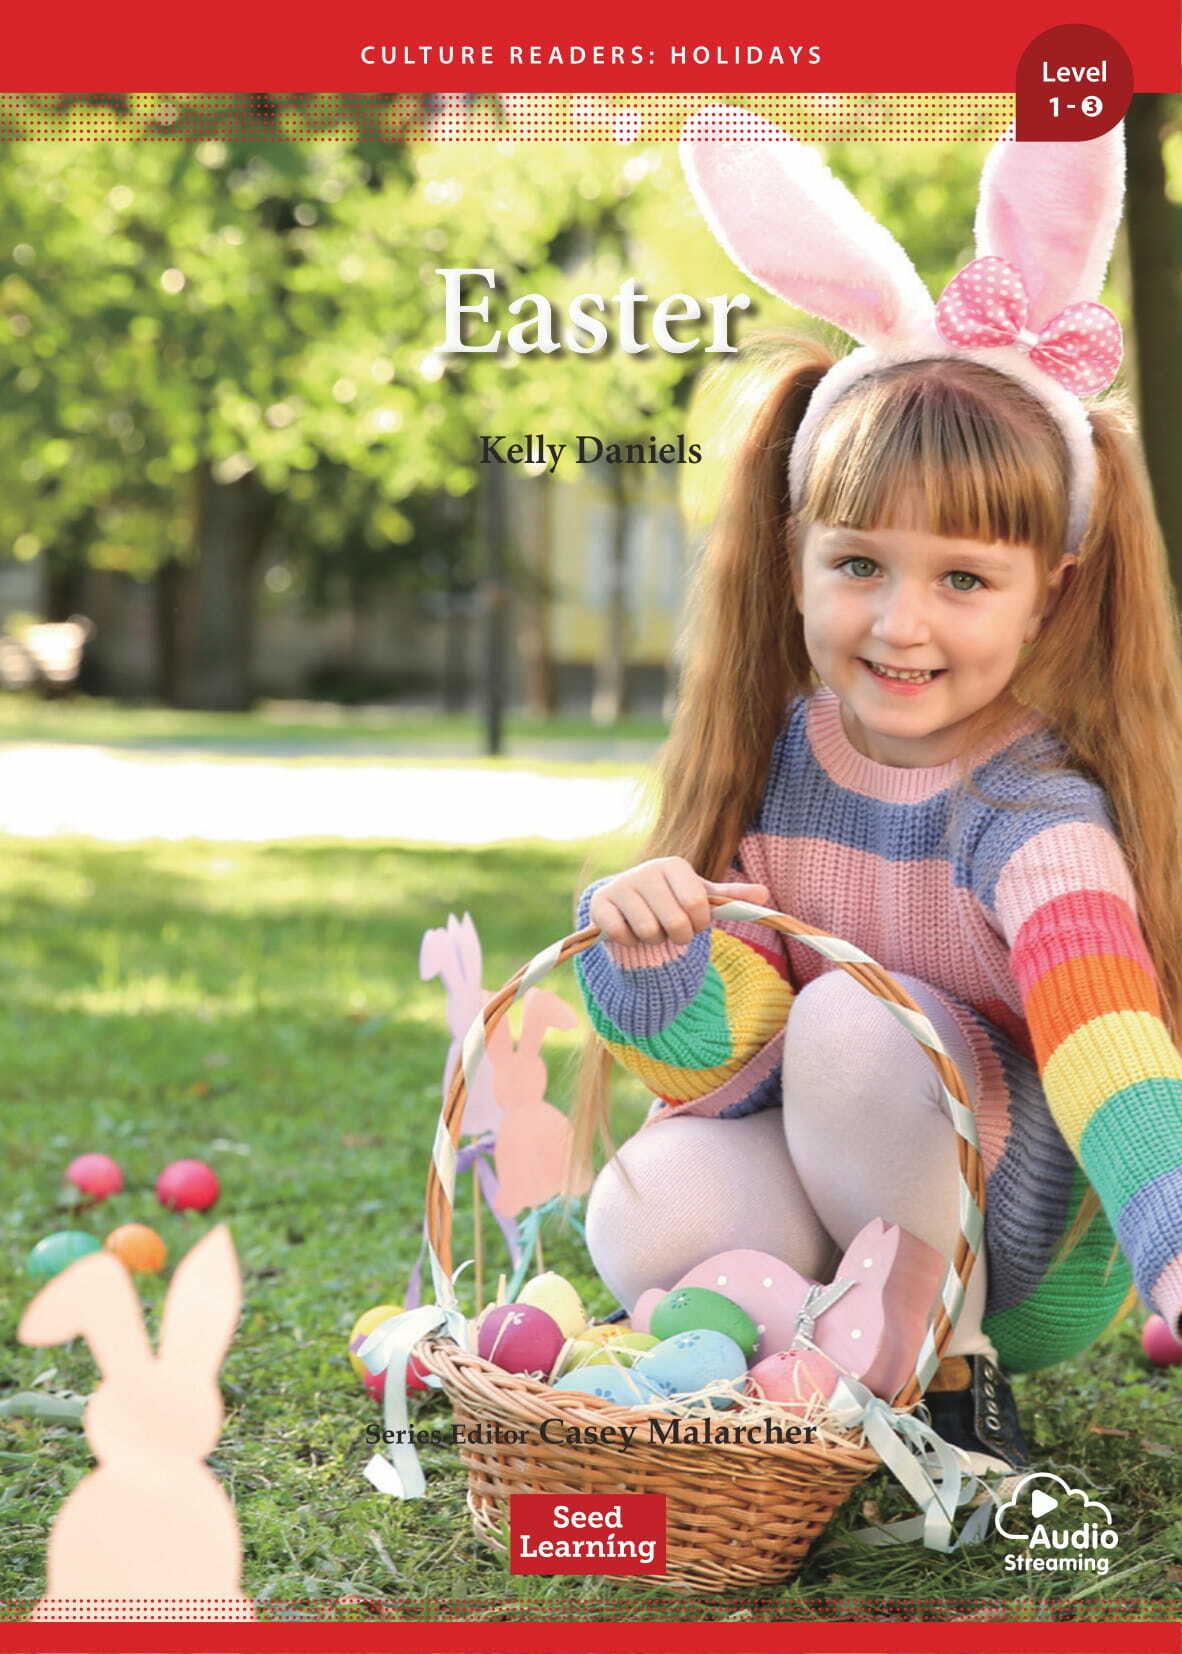 Culture Readers Holidays Level 1 : Easter (Story Book + Audio APP)